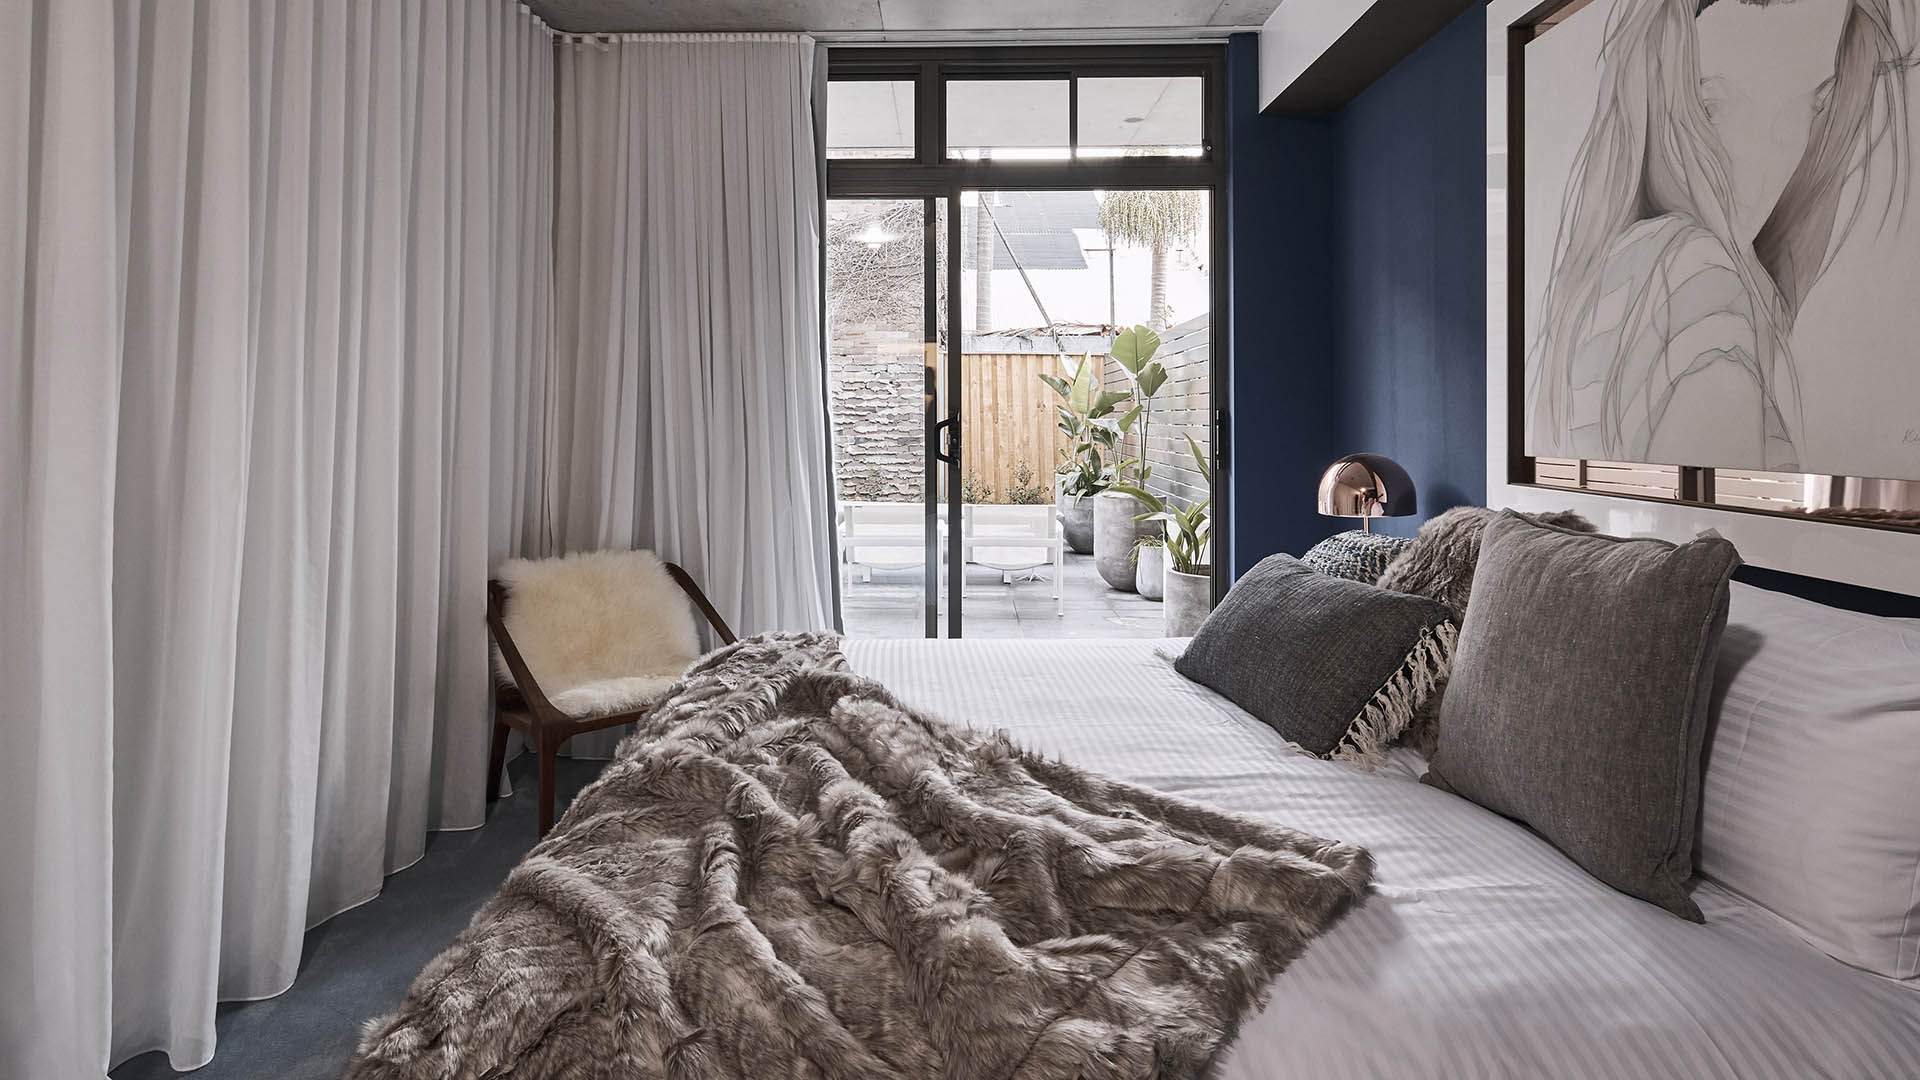 A Look Inside The Collectionist, the New Sydney Hotel Letting Guests Pick Their Own Designer Rooms